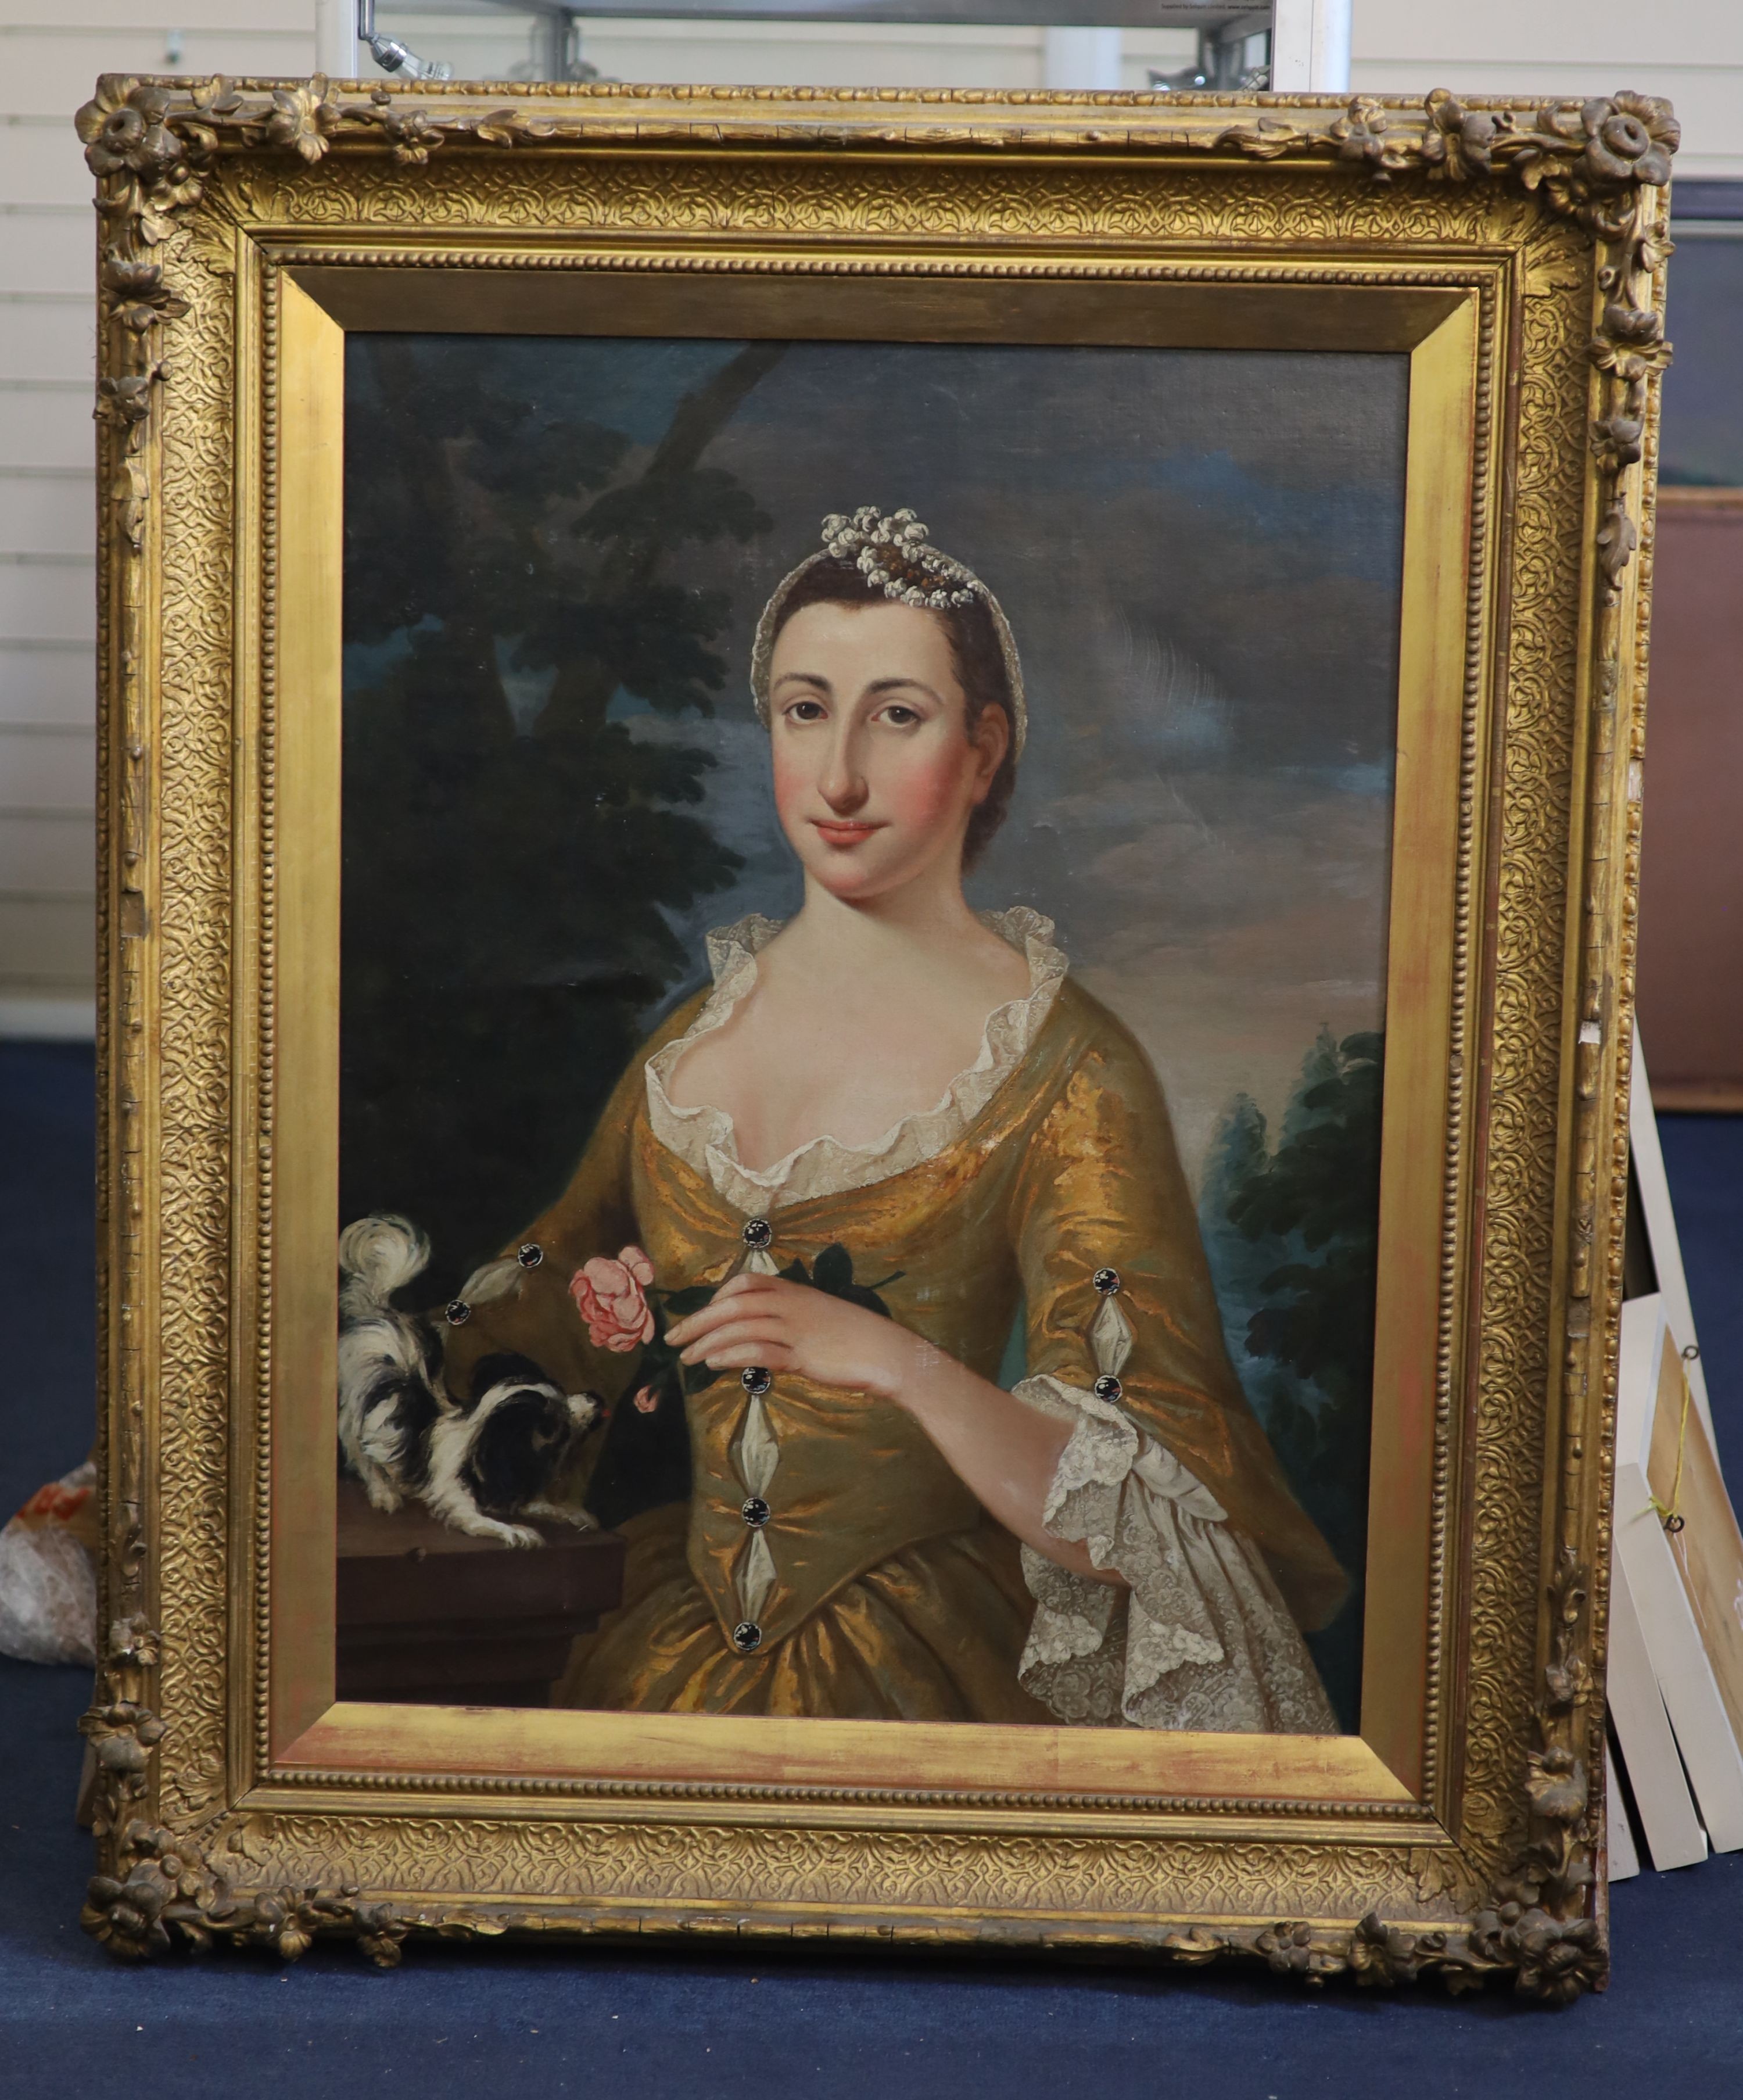 Early 18th century French School, Portrait of a lady wearing a yellow dress holding a rose with a lap dog beside her, oil on canvas, 82 x 62cm